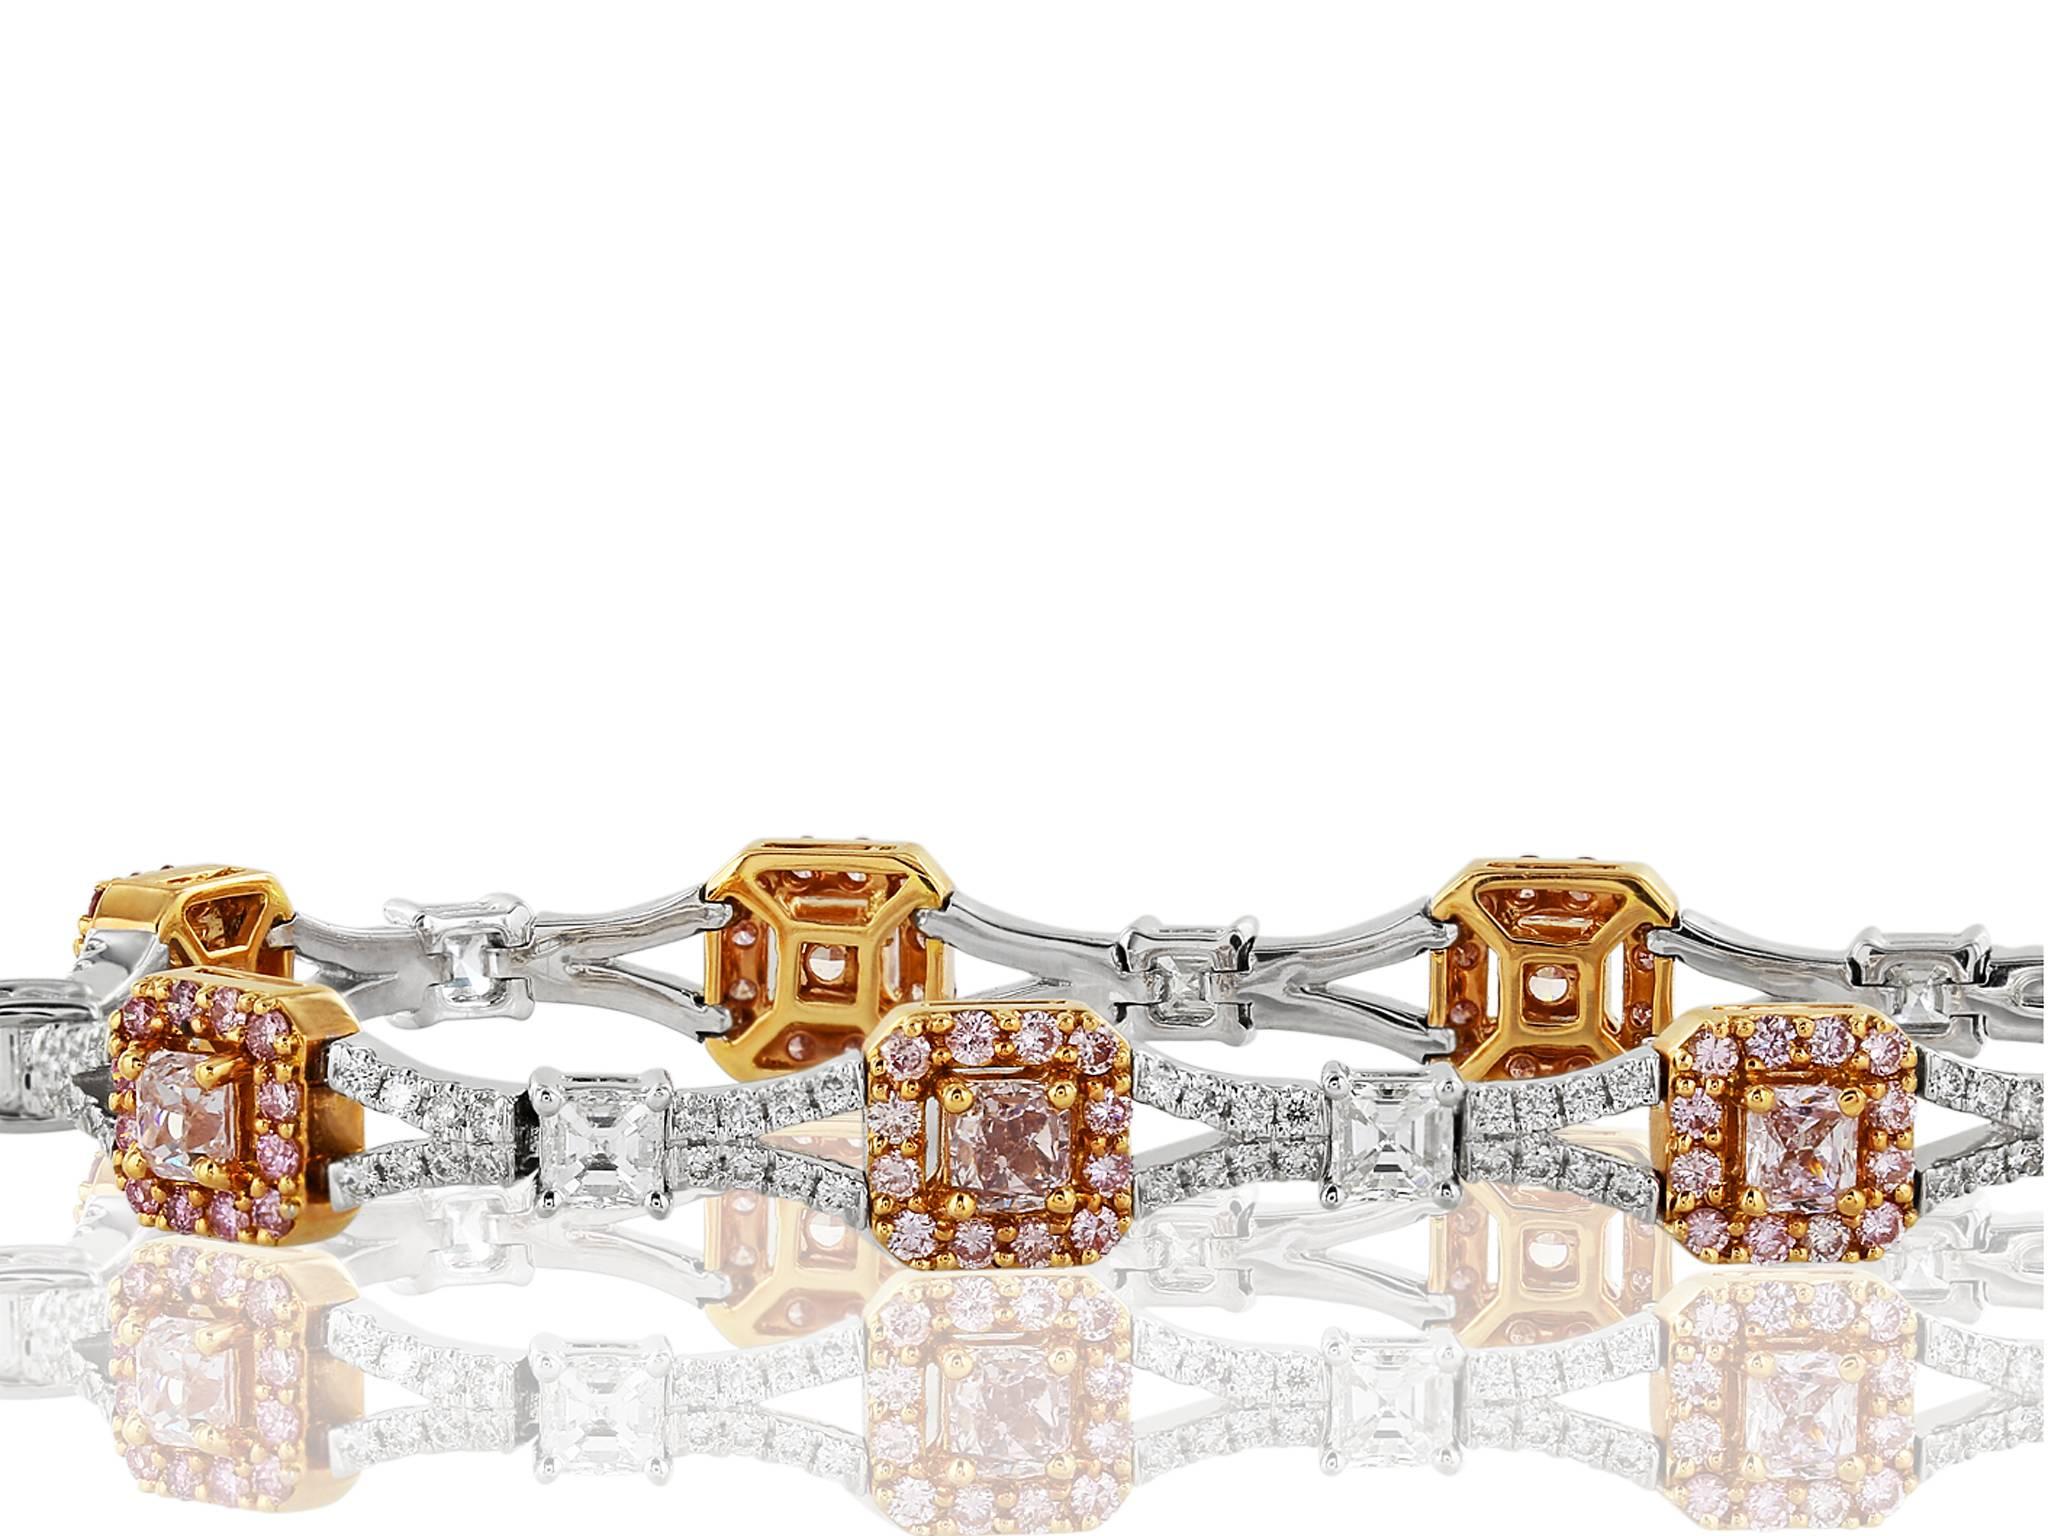 Two tone 18 karat white and pink gold flexible bracelet consisting of 8 square radiant cut natural pink diamonds, 8 asscher cut colorless diamonds and round brilliant cut natural pink  and colorless diamond accents having a total weight of 5.65